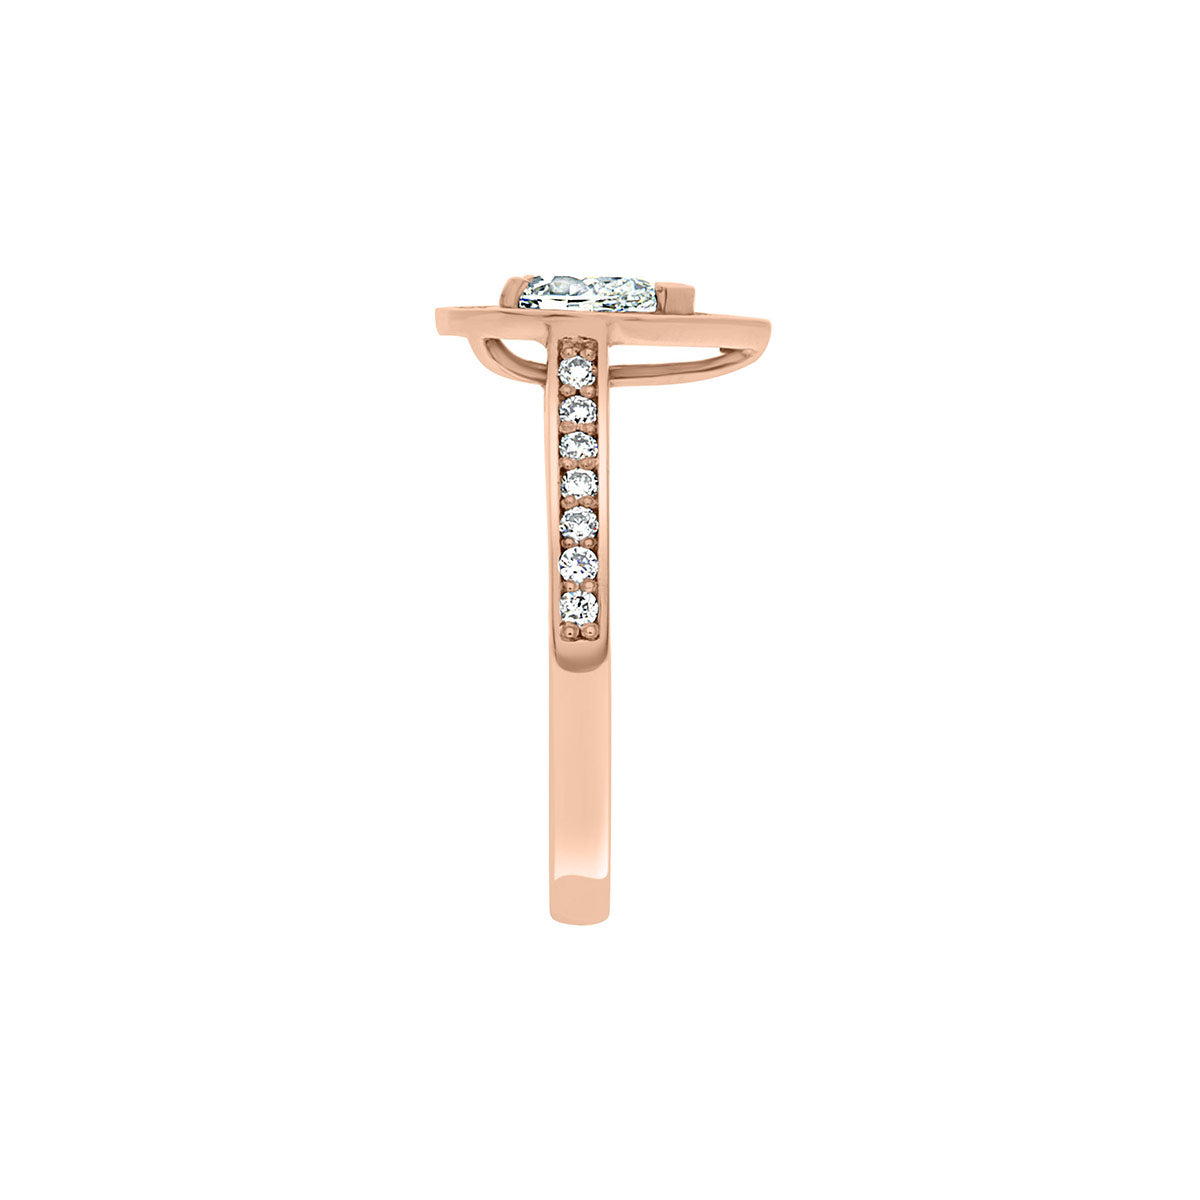 Pear Shaped Halo Engagement Ring in Rose gold, upright position, view from the side,white background